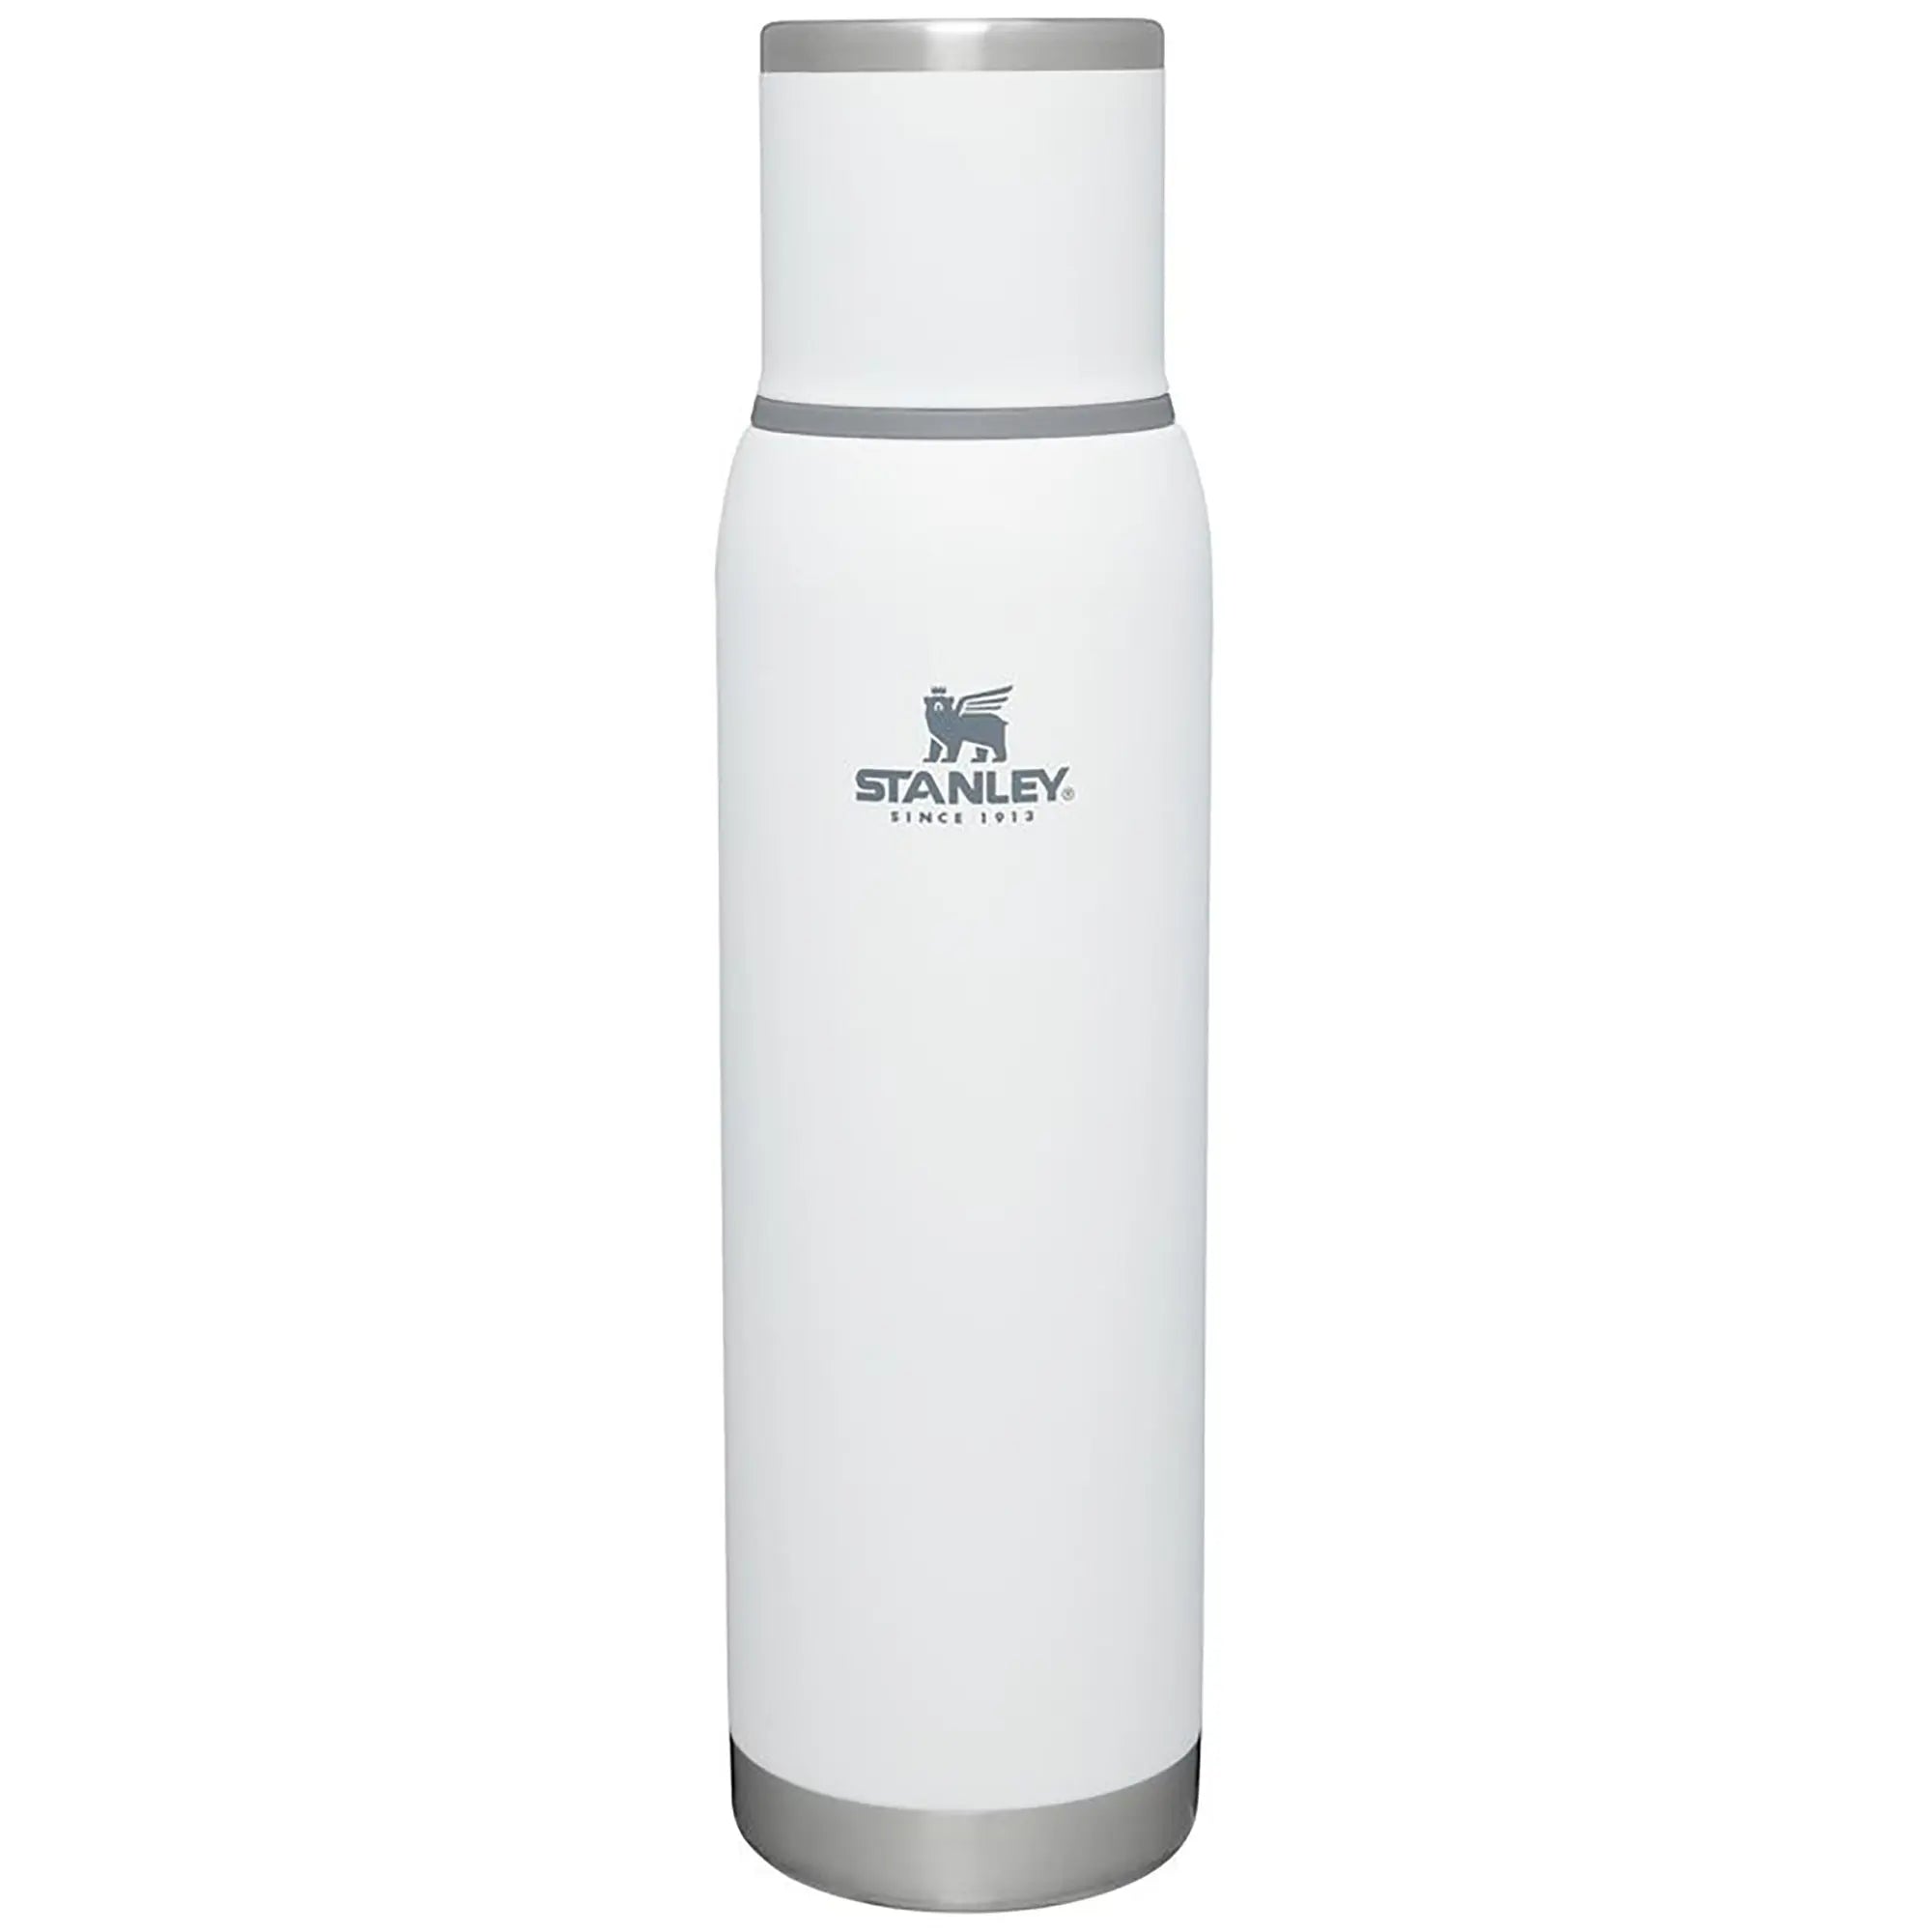 Stanley Adventure To-Go Vacuum Insulated Stainless Steel Bottle Stanley